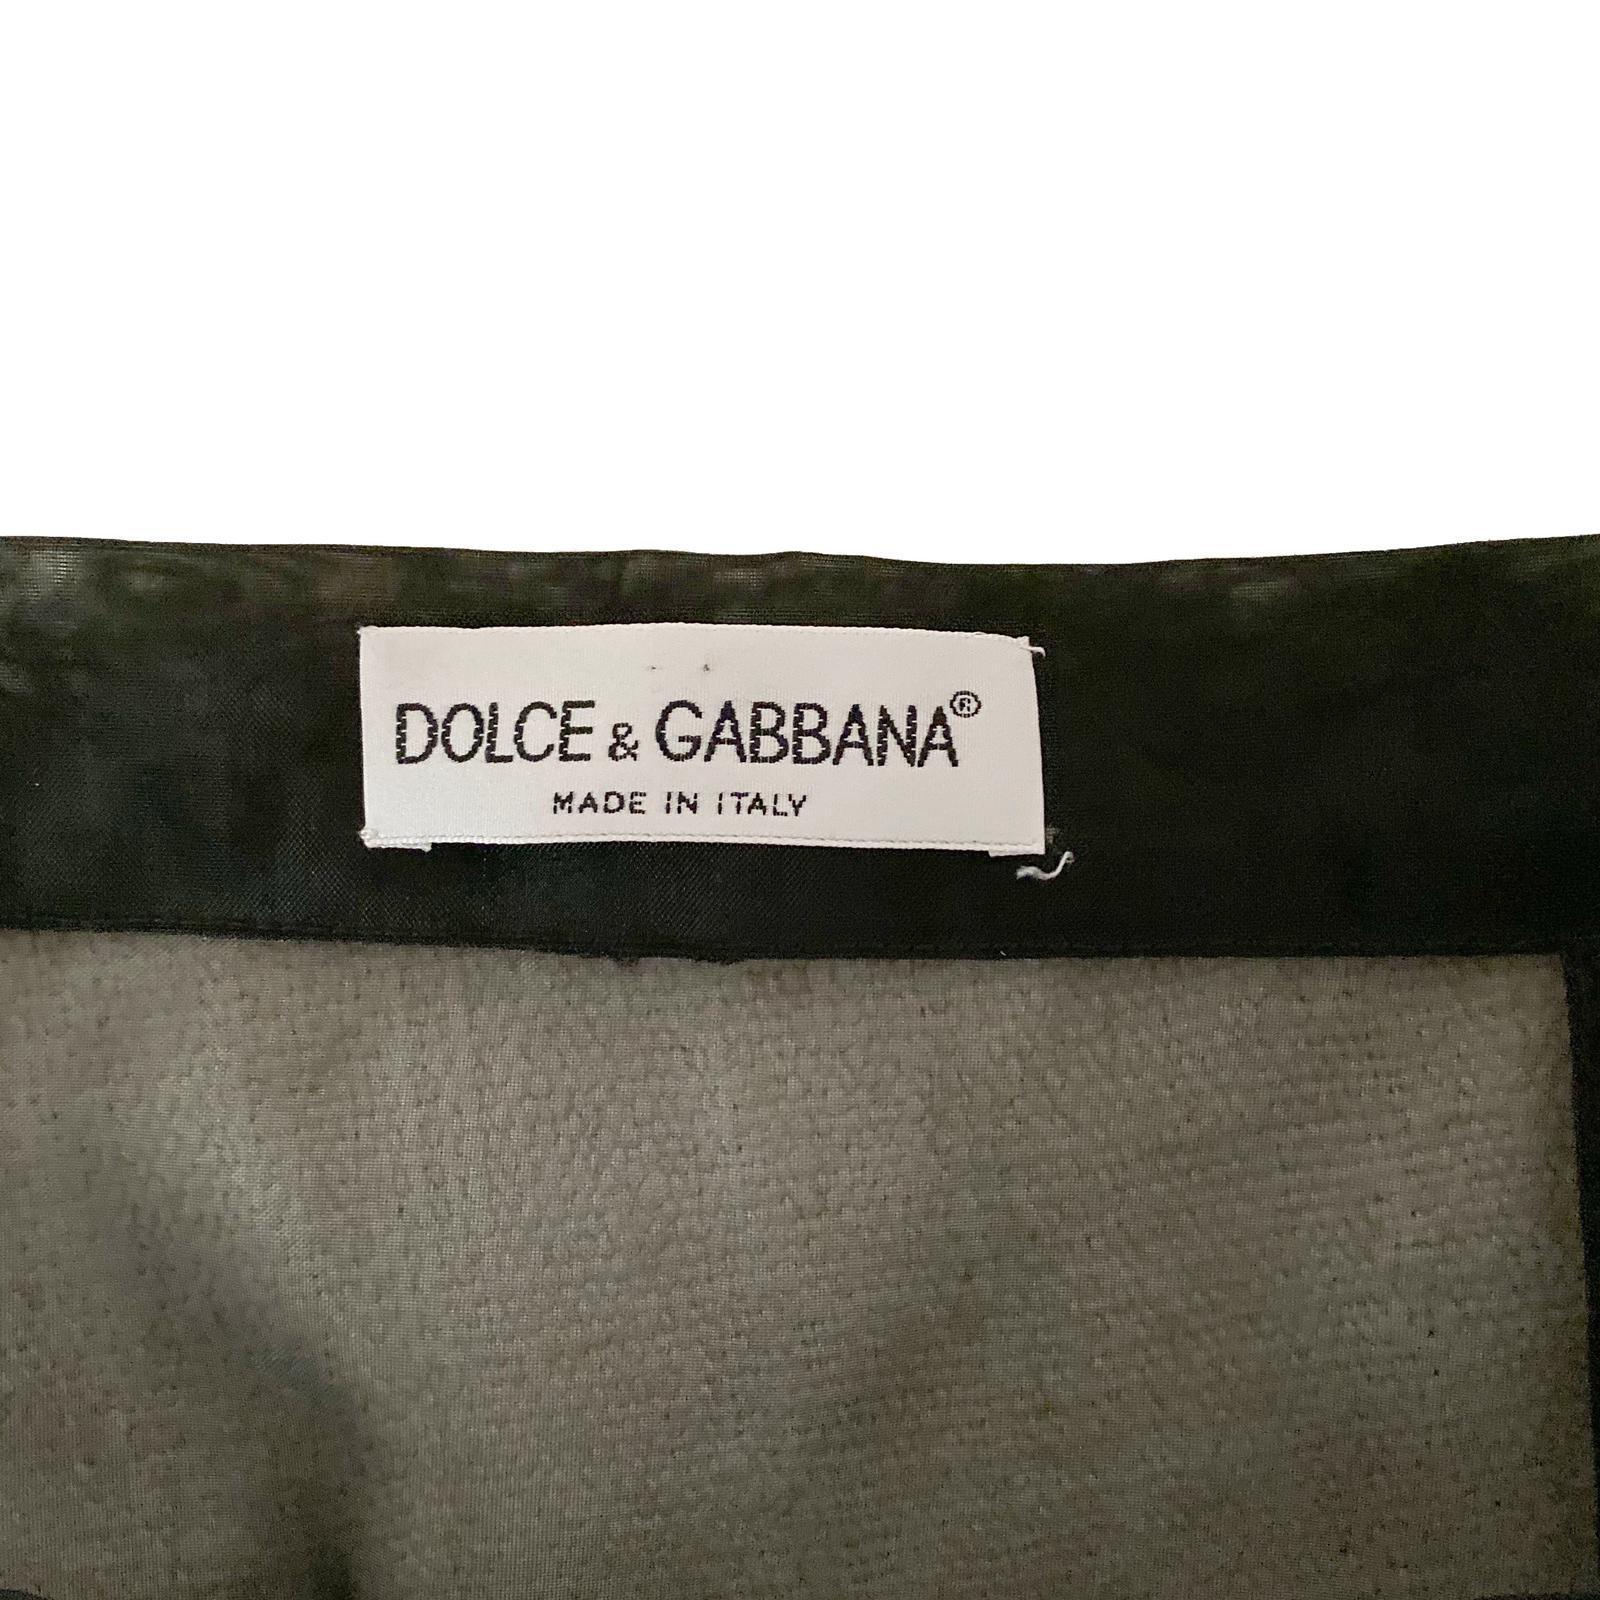 Dolce & Gabbana F/W 95 Black knee-length sheer skirt with double teal fur trim, also showcased at the 1995 edition of “Donna sotto le Stelle” in Rome.
Size IT 42
Measurements:
waist: 69 cm/ 27 inch 
length : 53 cm/ 21 inch

100% Polyamide Nylon 100%